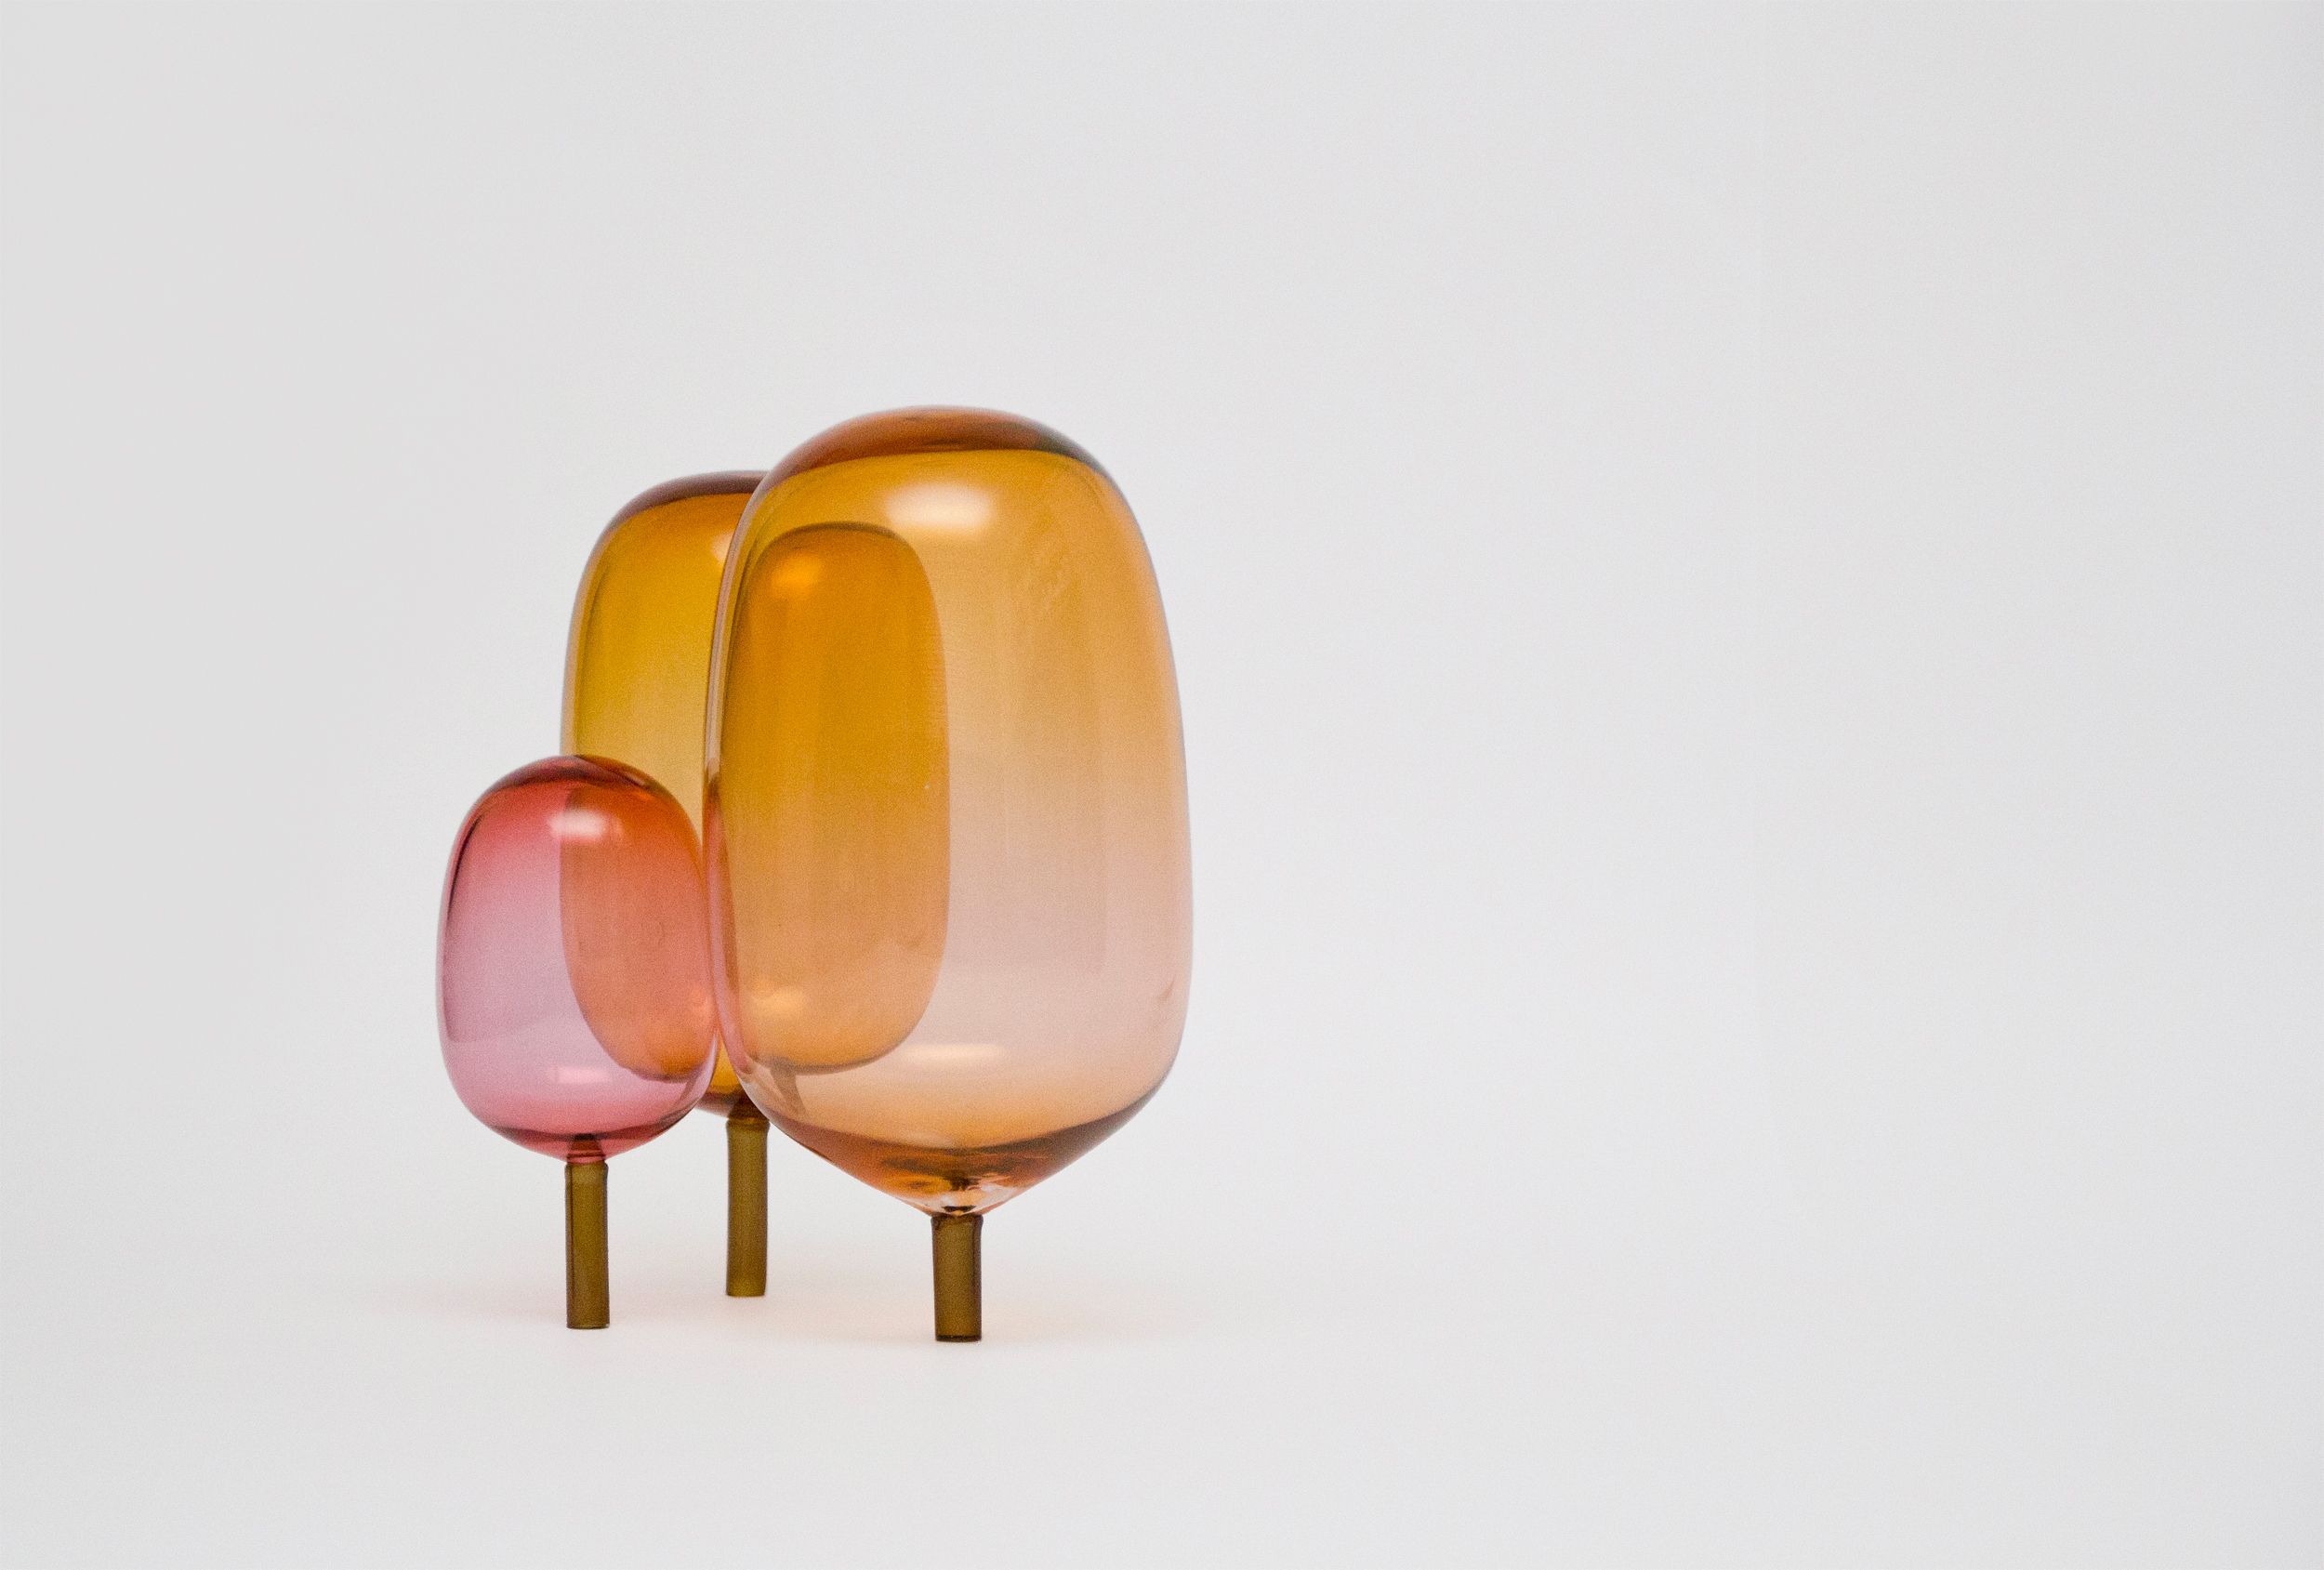 The woods designed by Jonas Stokke, Øystein Austad and Andreas Engesvik, pink and orange glass sculptures, mouth blown glass